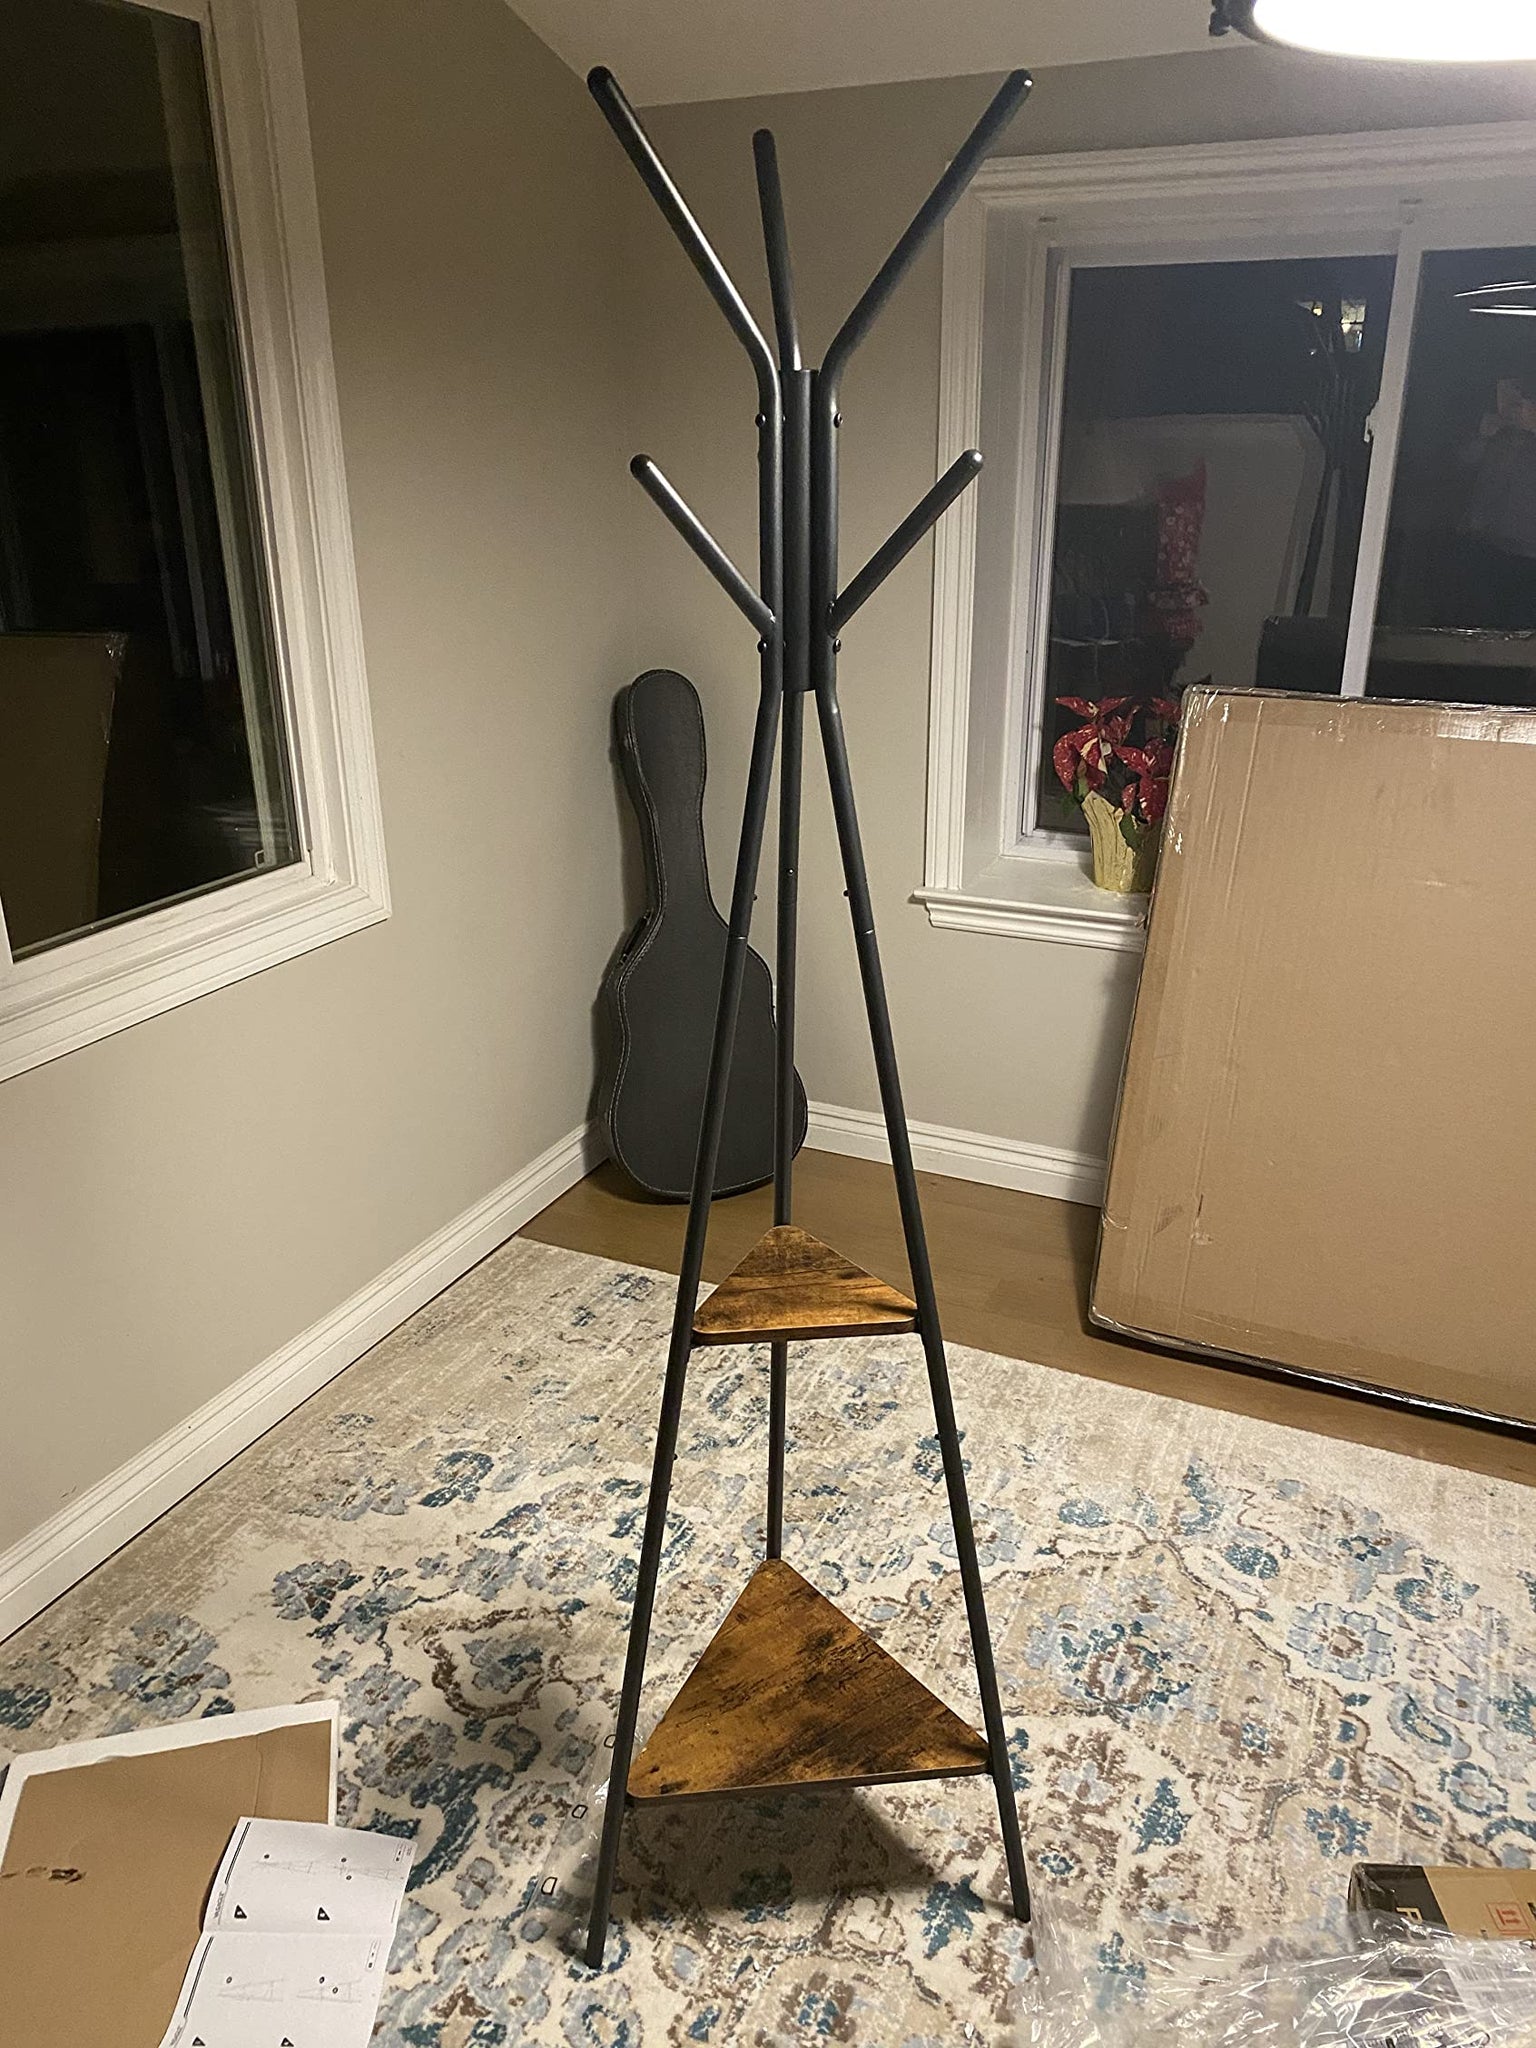 Coat Rack Freestanding, Coat Hanger Stand, Hall Tree with 2 Shelves, for Clothes, Hat, Bag, Industrial Style, Greige and Black